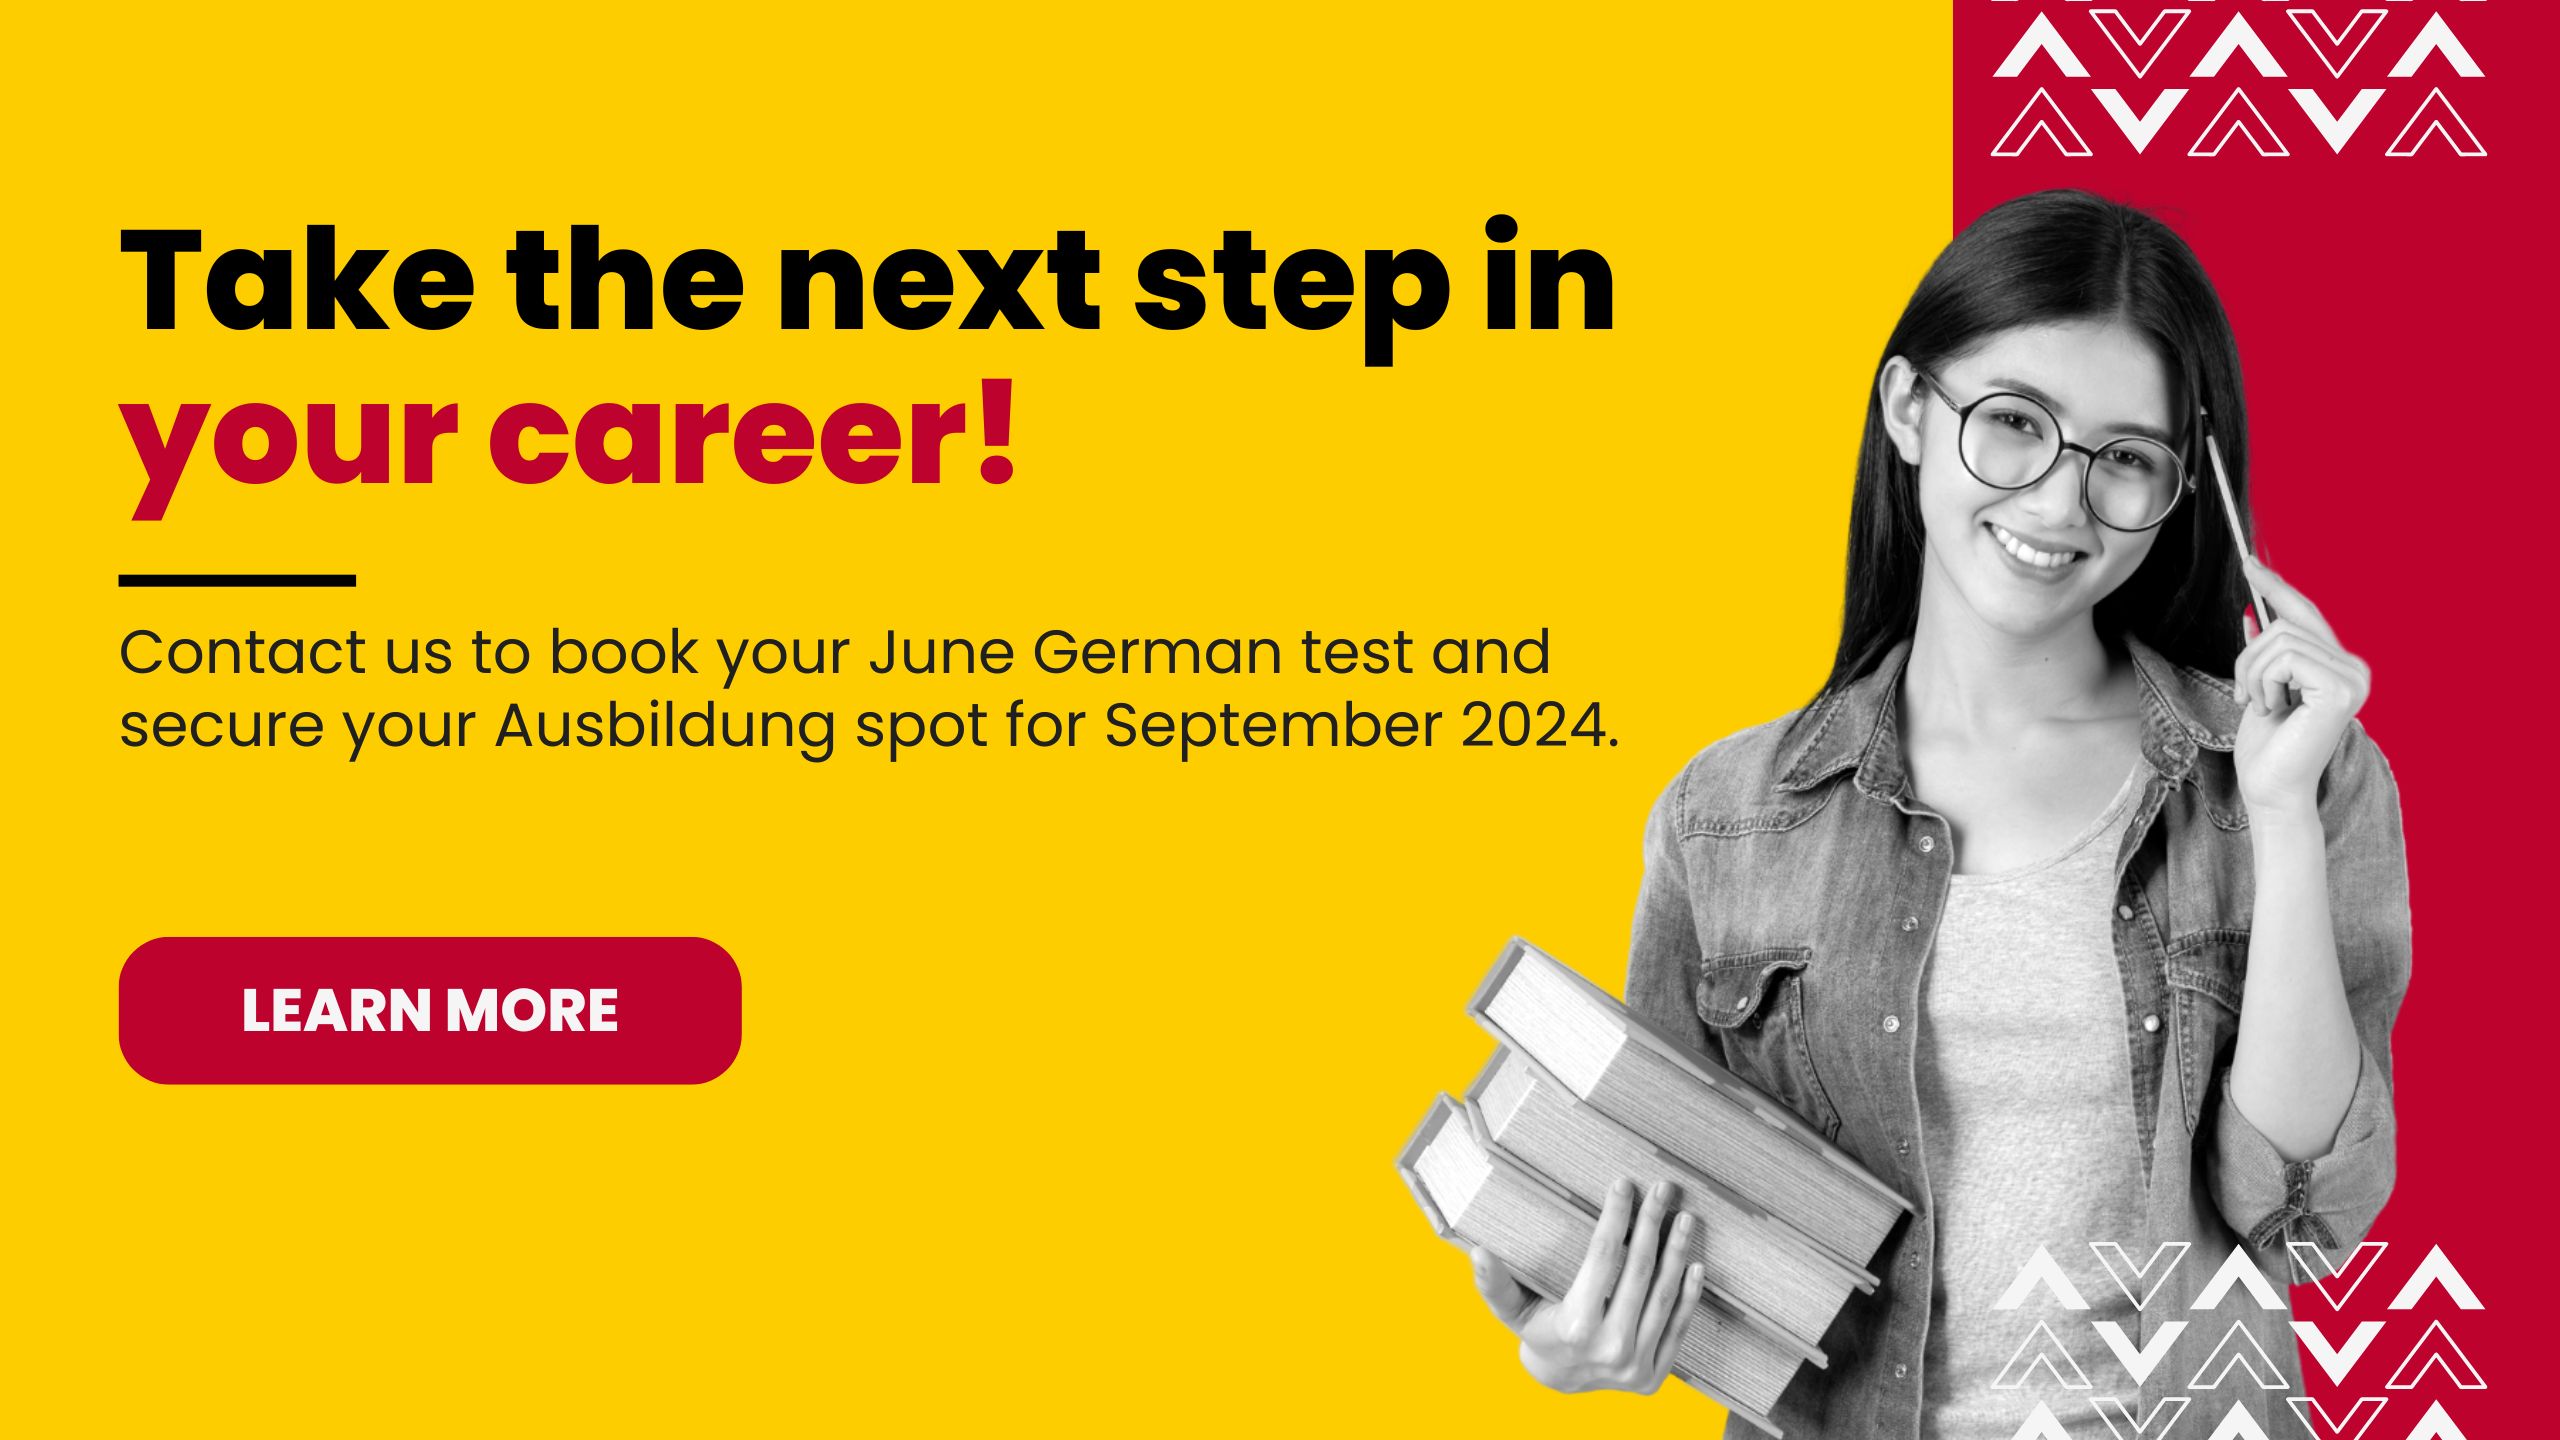 Apply for Ausbildung 2024 Sep intake and B1B2 test in June together